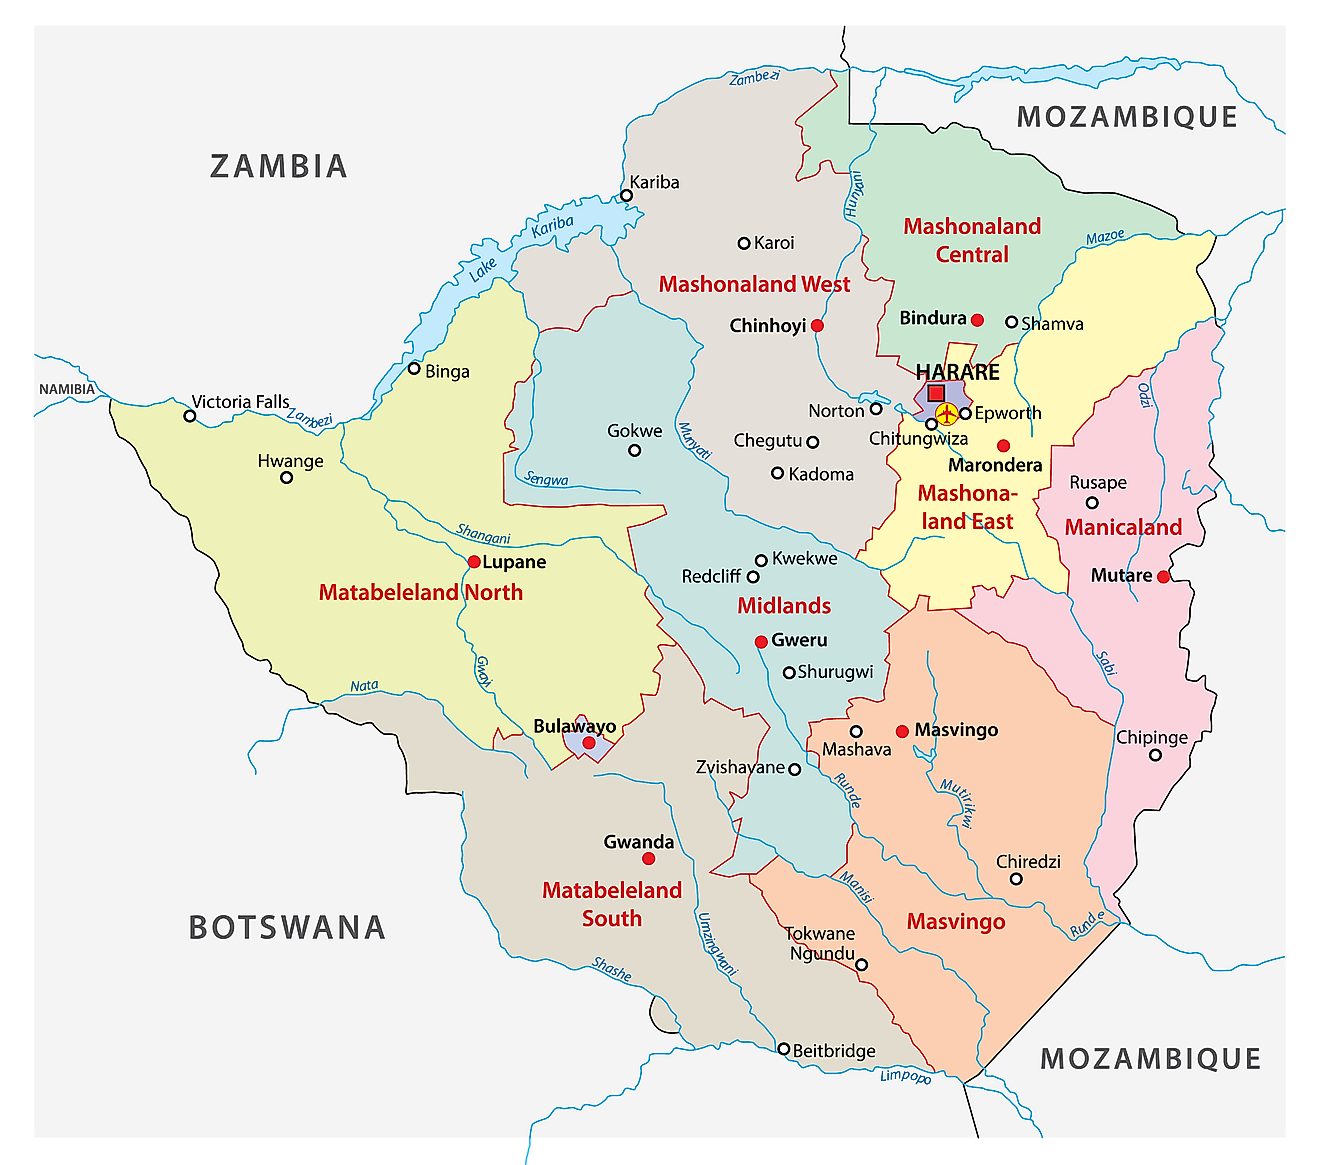 The political map of Zimbabwe displaying its 8 provinces with their capitals and 2 cities with provincial status. 